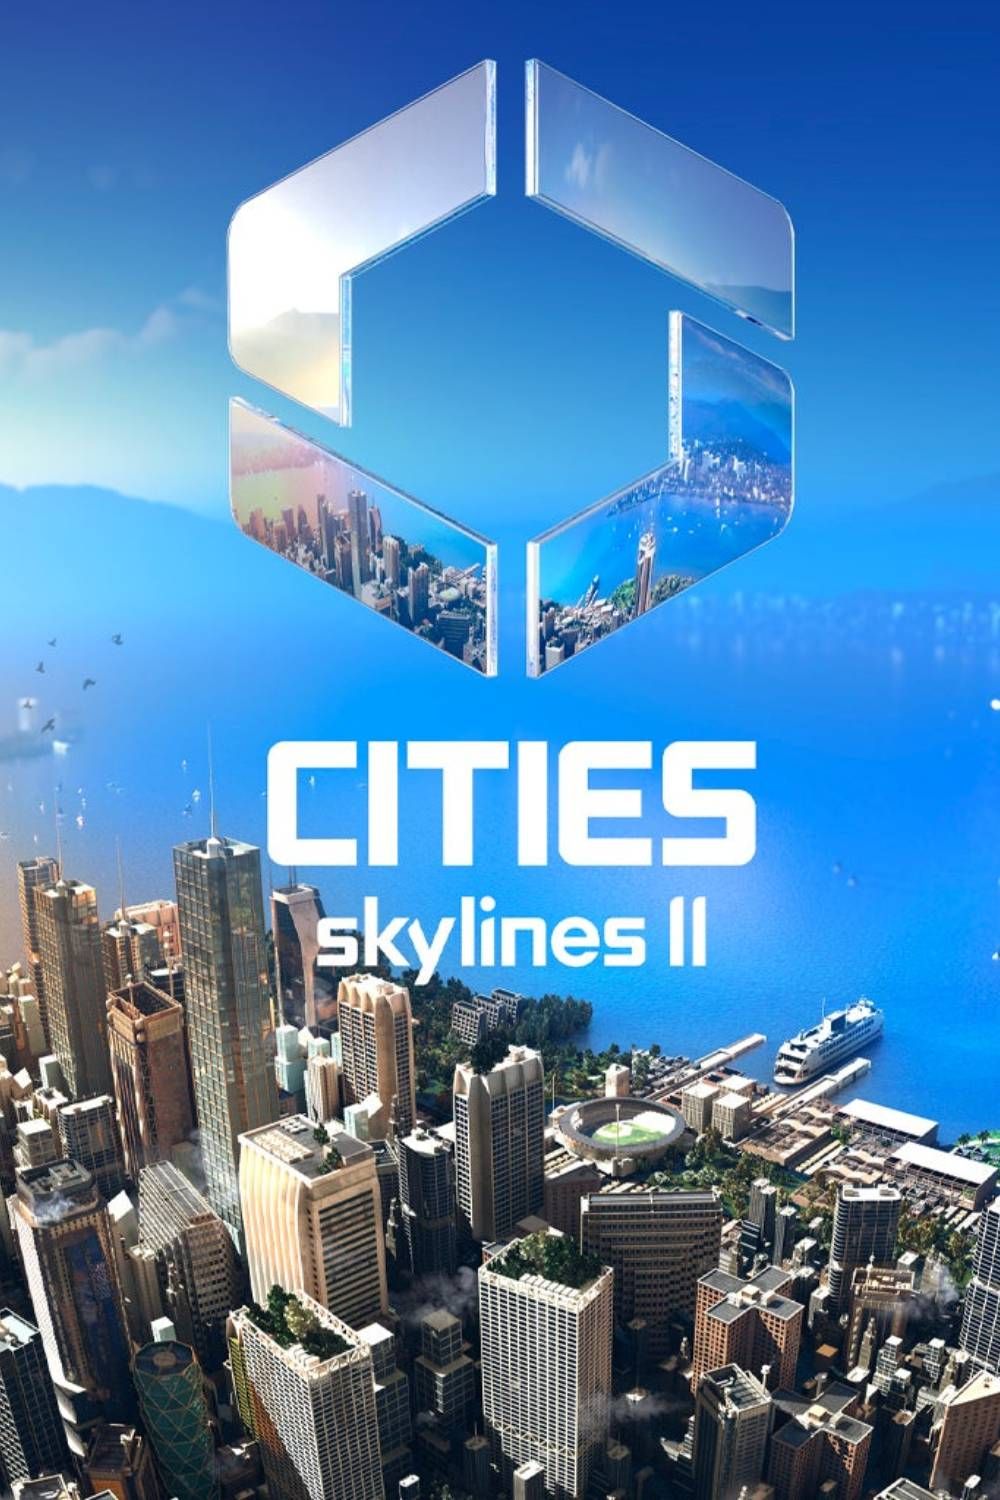 Cities Skylines 2 Review - An Unfinished Mess of A Game 